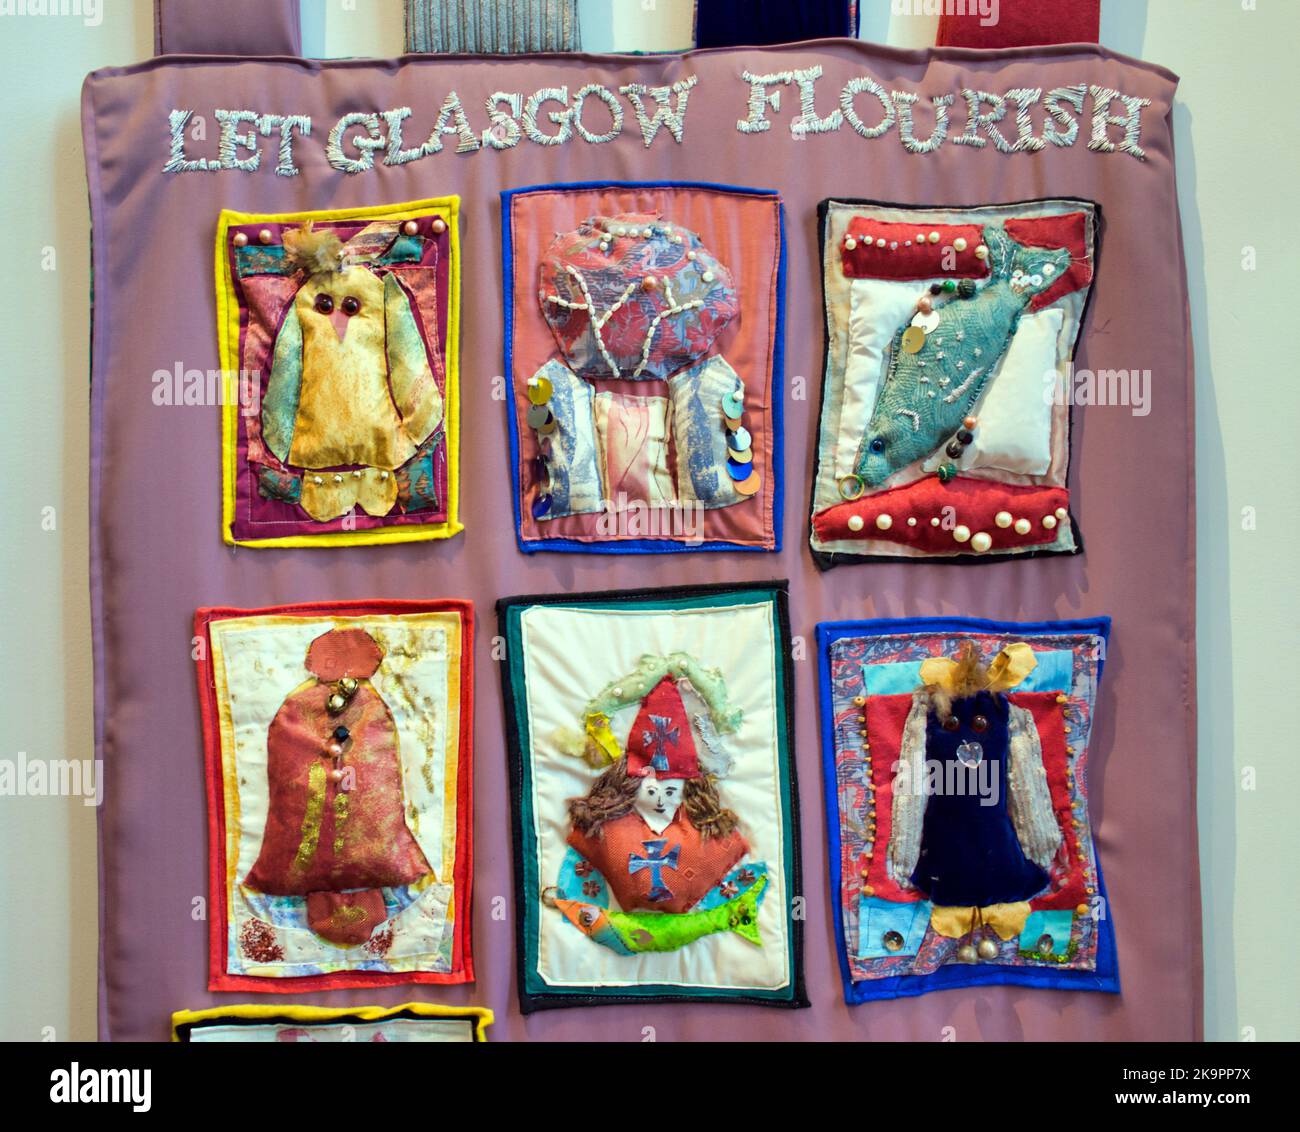 St. Mungo Museum Of Religious Life & Art let Glasgow flourish quilted banner multicultural Stock Photo